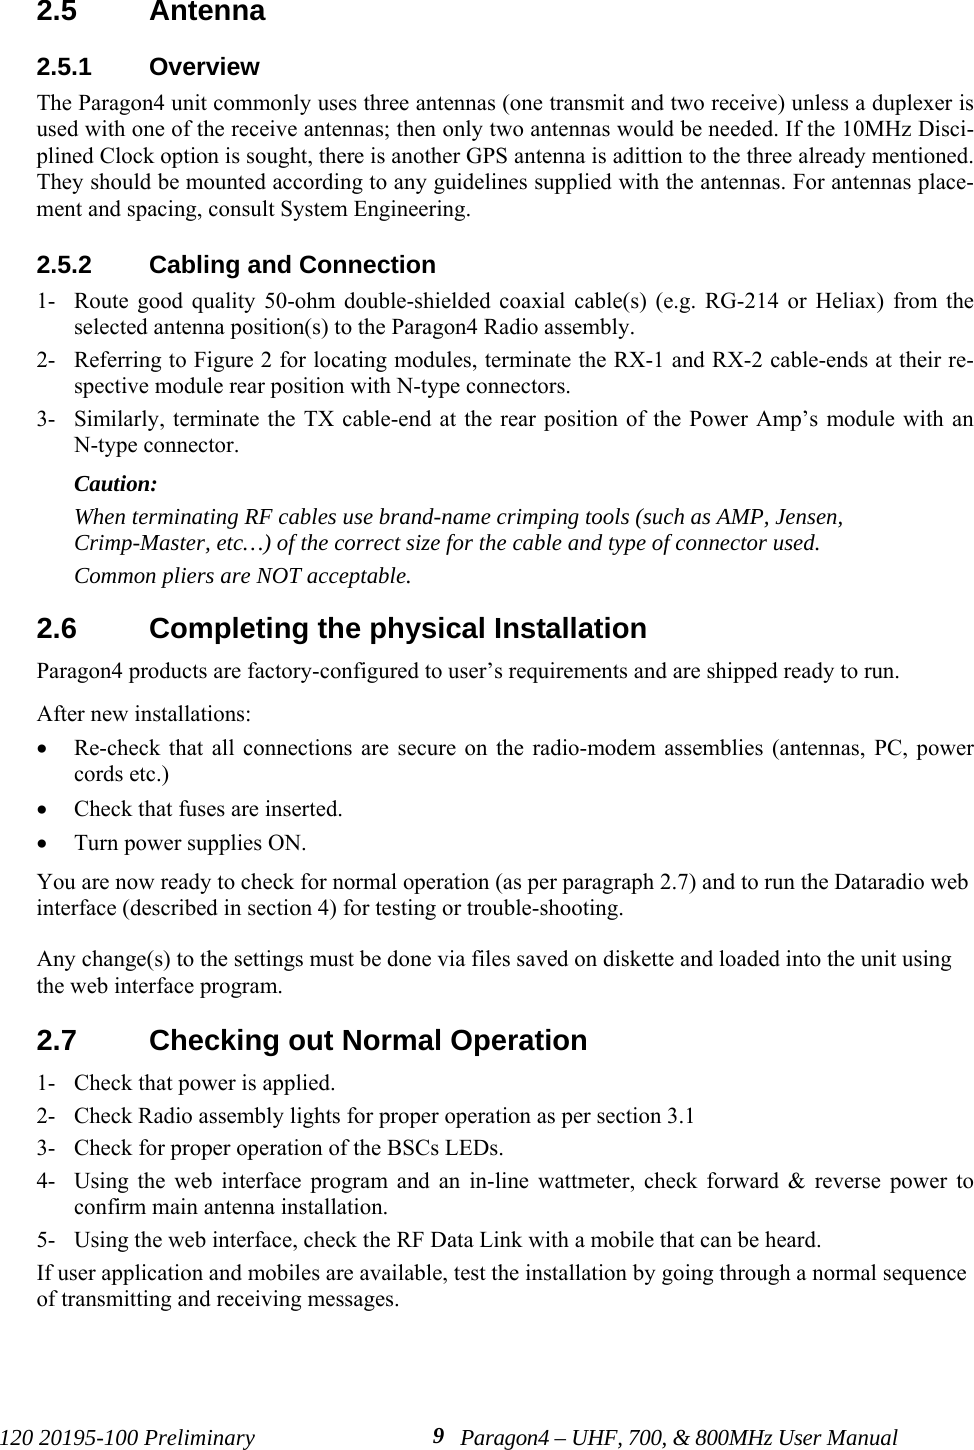 120 20195-100 Preliminary Paragon4 – UHF, 700, &amp; 800MHz User Manual92.5  Antenna2.5.1  OverviewThe Paragon4 unit commonly uses three antennas (one transmit and two receive) unless a duplexer isused with one of the receive antennas; then only two antennas would be needed. If the 10MHz Disci-plined Clock option is sought, there is another GPS antenna is adittion to the three already mentioned.They should be mounted according to any guidelines supplied with the antennas. For antennas place-ment and spacing, consult System Engineering. 2.5.2  Cabling and Connection1- Route good quality 50-ohm double-shielded coaxial cable(s) (e.g. RG-214 or Heliax) from theselected antenna position(s) to the Paragon4 Radio assembly.2- Referring to Figure 2 for locating modules, terminate the RX-1 and RX-2 cable-ends at their re-spective module rear position with N-type connectors.3- Similarly, terminate the TX cable-end at the rear position of the Power Amp’s module with anN-type connector.Caution: When terminating RF cables use brand-name crimping tools (such as AMP, Jensen,Crimp-Master, etc…) of the correct size for the cable and type of connector used.Common pliers are NOT acceptable.2.6  Completing the physical InstallationParagon4 products are factory-configured to user’s requirements and are shipped ready to run. After new installations:• Re-check that all connections are secure on the radio-modem assemblies (antennas, PC, powercords etc.)• Check that fuses are inserted.• Turn power supplies ON.You are now ready to check for normal operation (as per paragraph 2.7) and to run the Dataradio webinterface (described in section 4) for testing or trouble-shooting. Any change(s) to the settings must be done via files saved on diskette and loaded into the unit usingthe web interface program.2.7  Checking out Normal Operation1- Check that power is applied.2- Check Radio assembly lights for proper operation as per section 3.13- Check for proper operation of the BSCs LEDs.4- Using the web interface program and an in-line wattmeter, check forward &amp; reverse power toconfirm main antenna installation.5- Using the web interface, check the RF Data Link with a mobile that can be heard.If user application and mobiles are available, test the installation by going through a normal sequenceof transmitting and receiving messages.